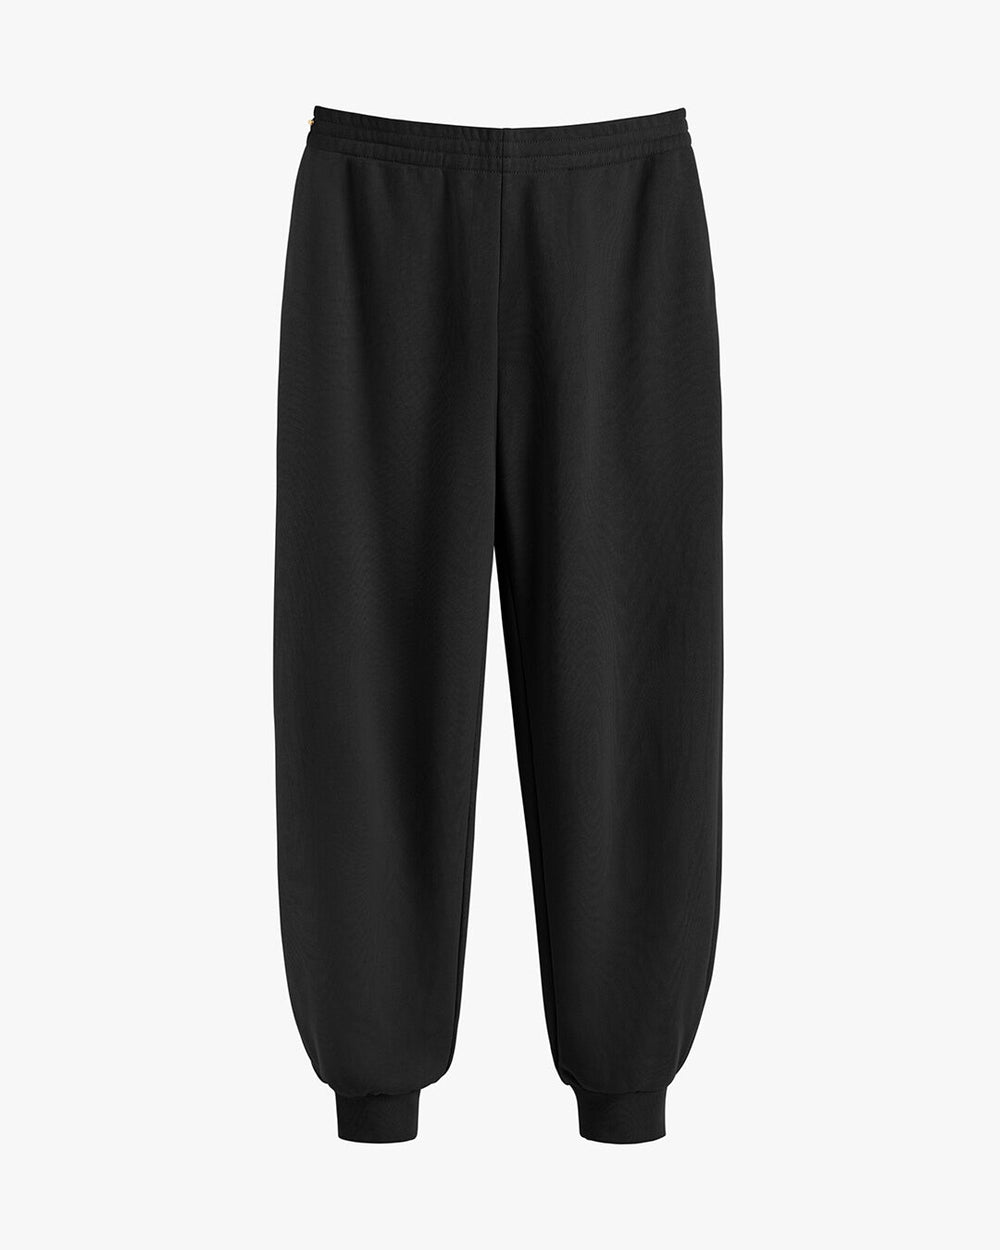 Pair of sweatpants with elastic waistband and ankle cuffs